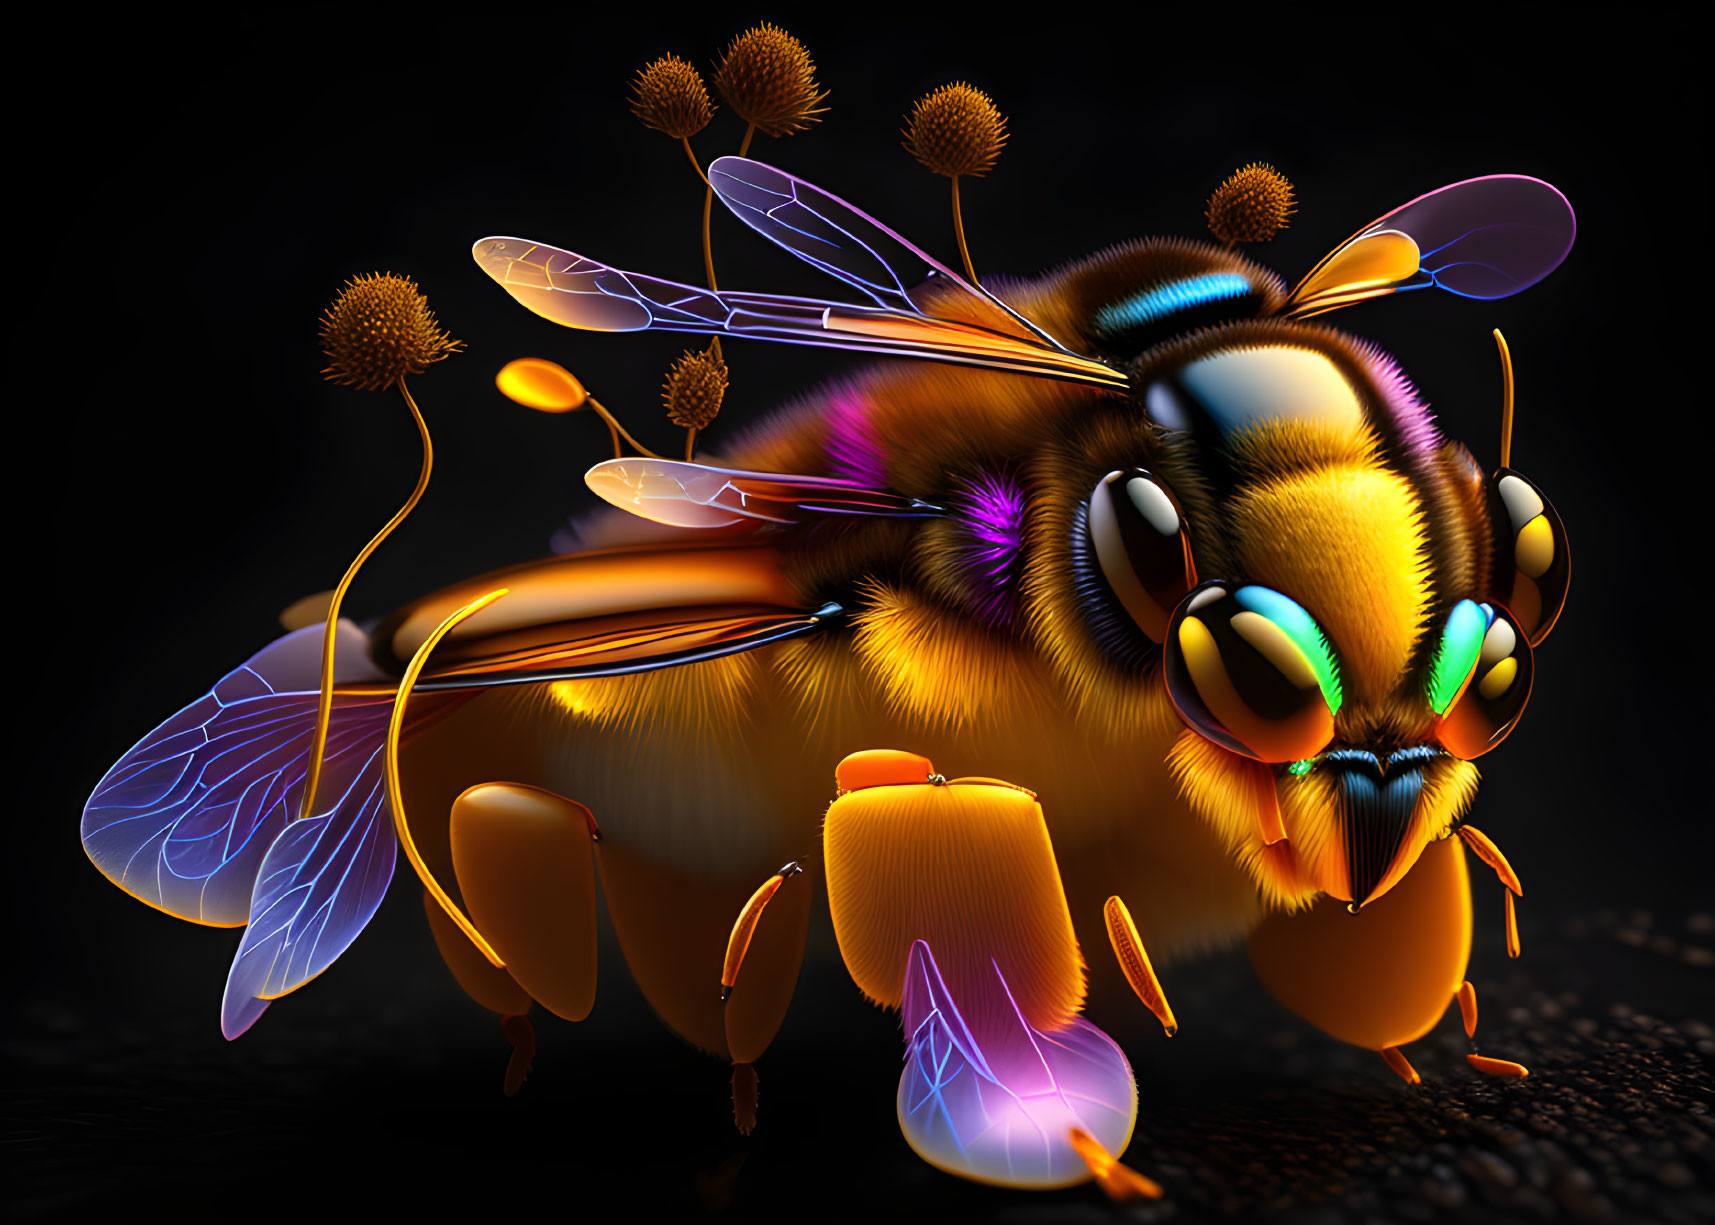 Colorful Digital Illustration of Exaggerated Bee Features